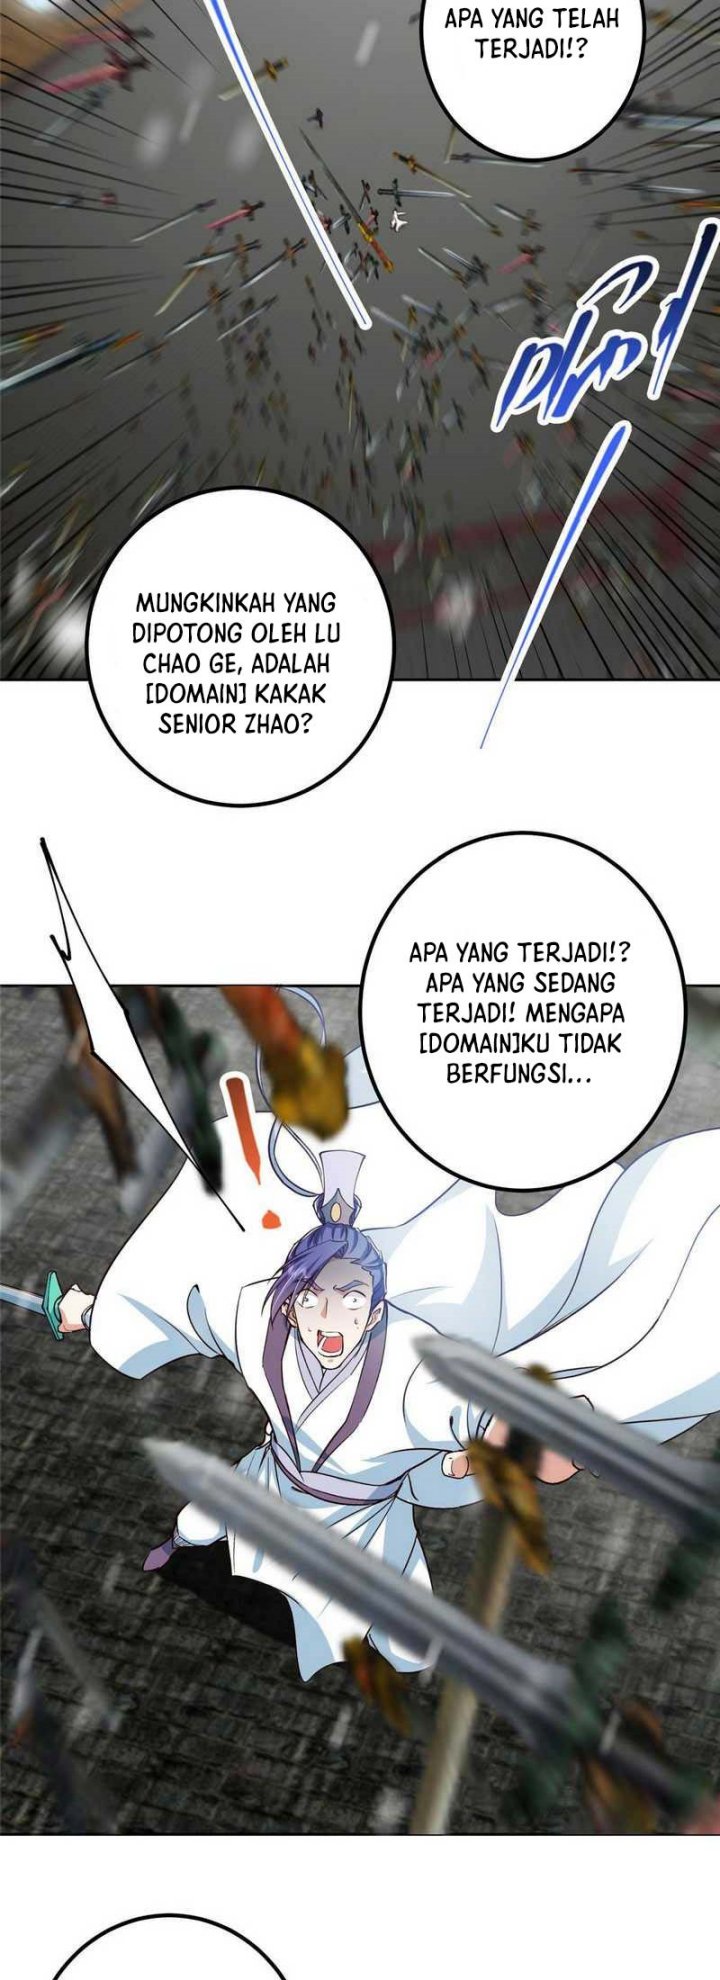 KomiknKeep A Low Profile, Sect Leader Chapter 264